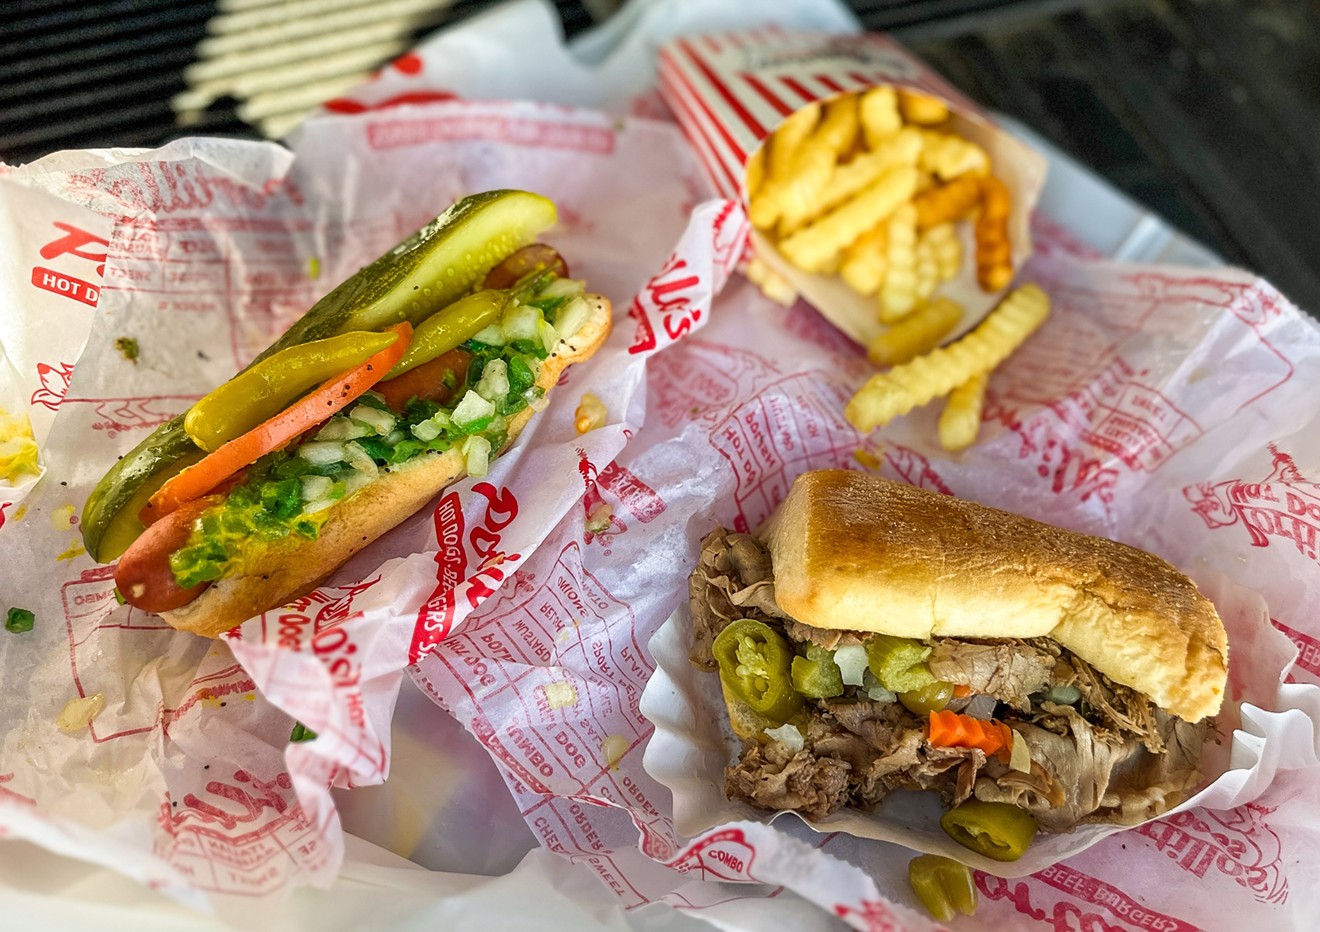 Success, finally: A hot dog, Italian beef and French fries from Portillo's Beef Bus in The Colony.